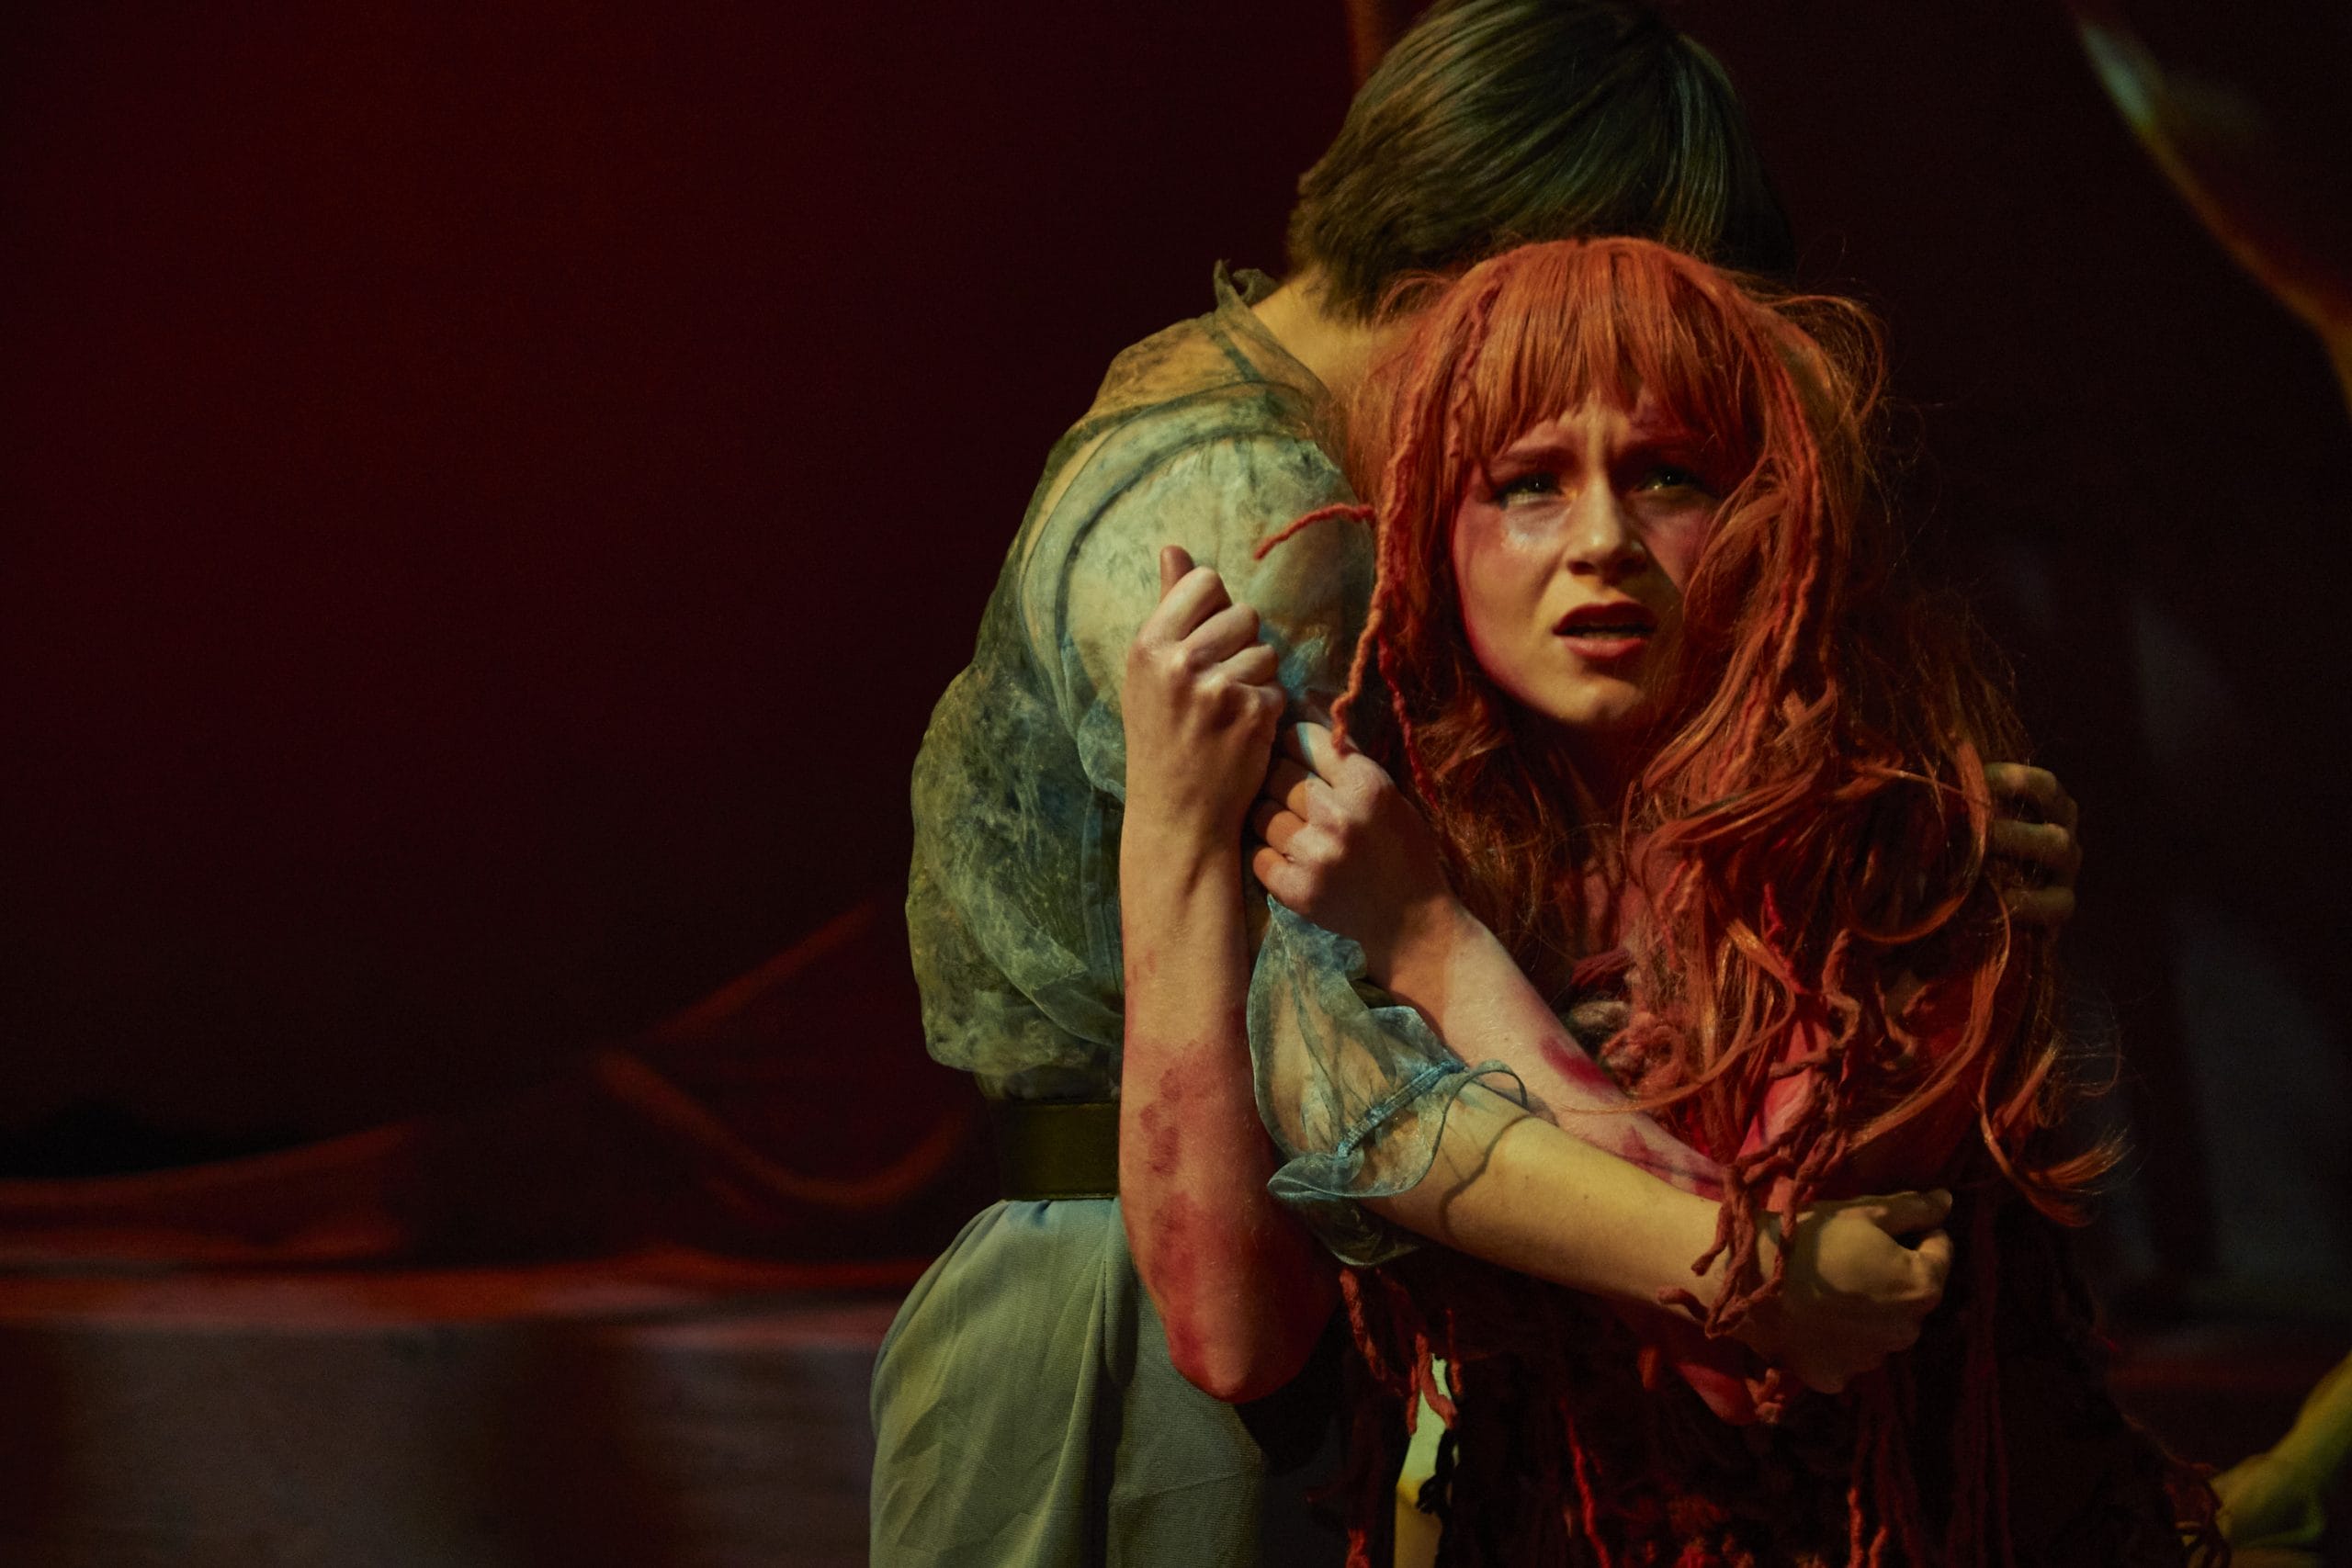 A student actor on stage with red hair being led off by another student